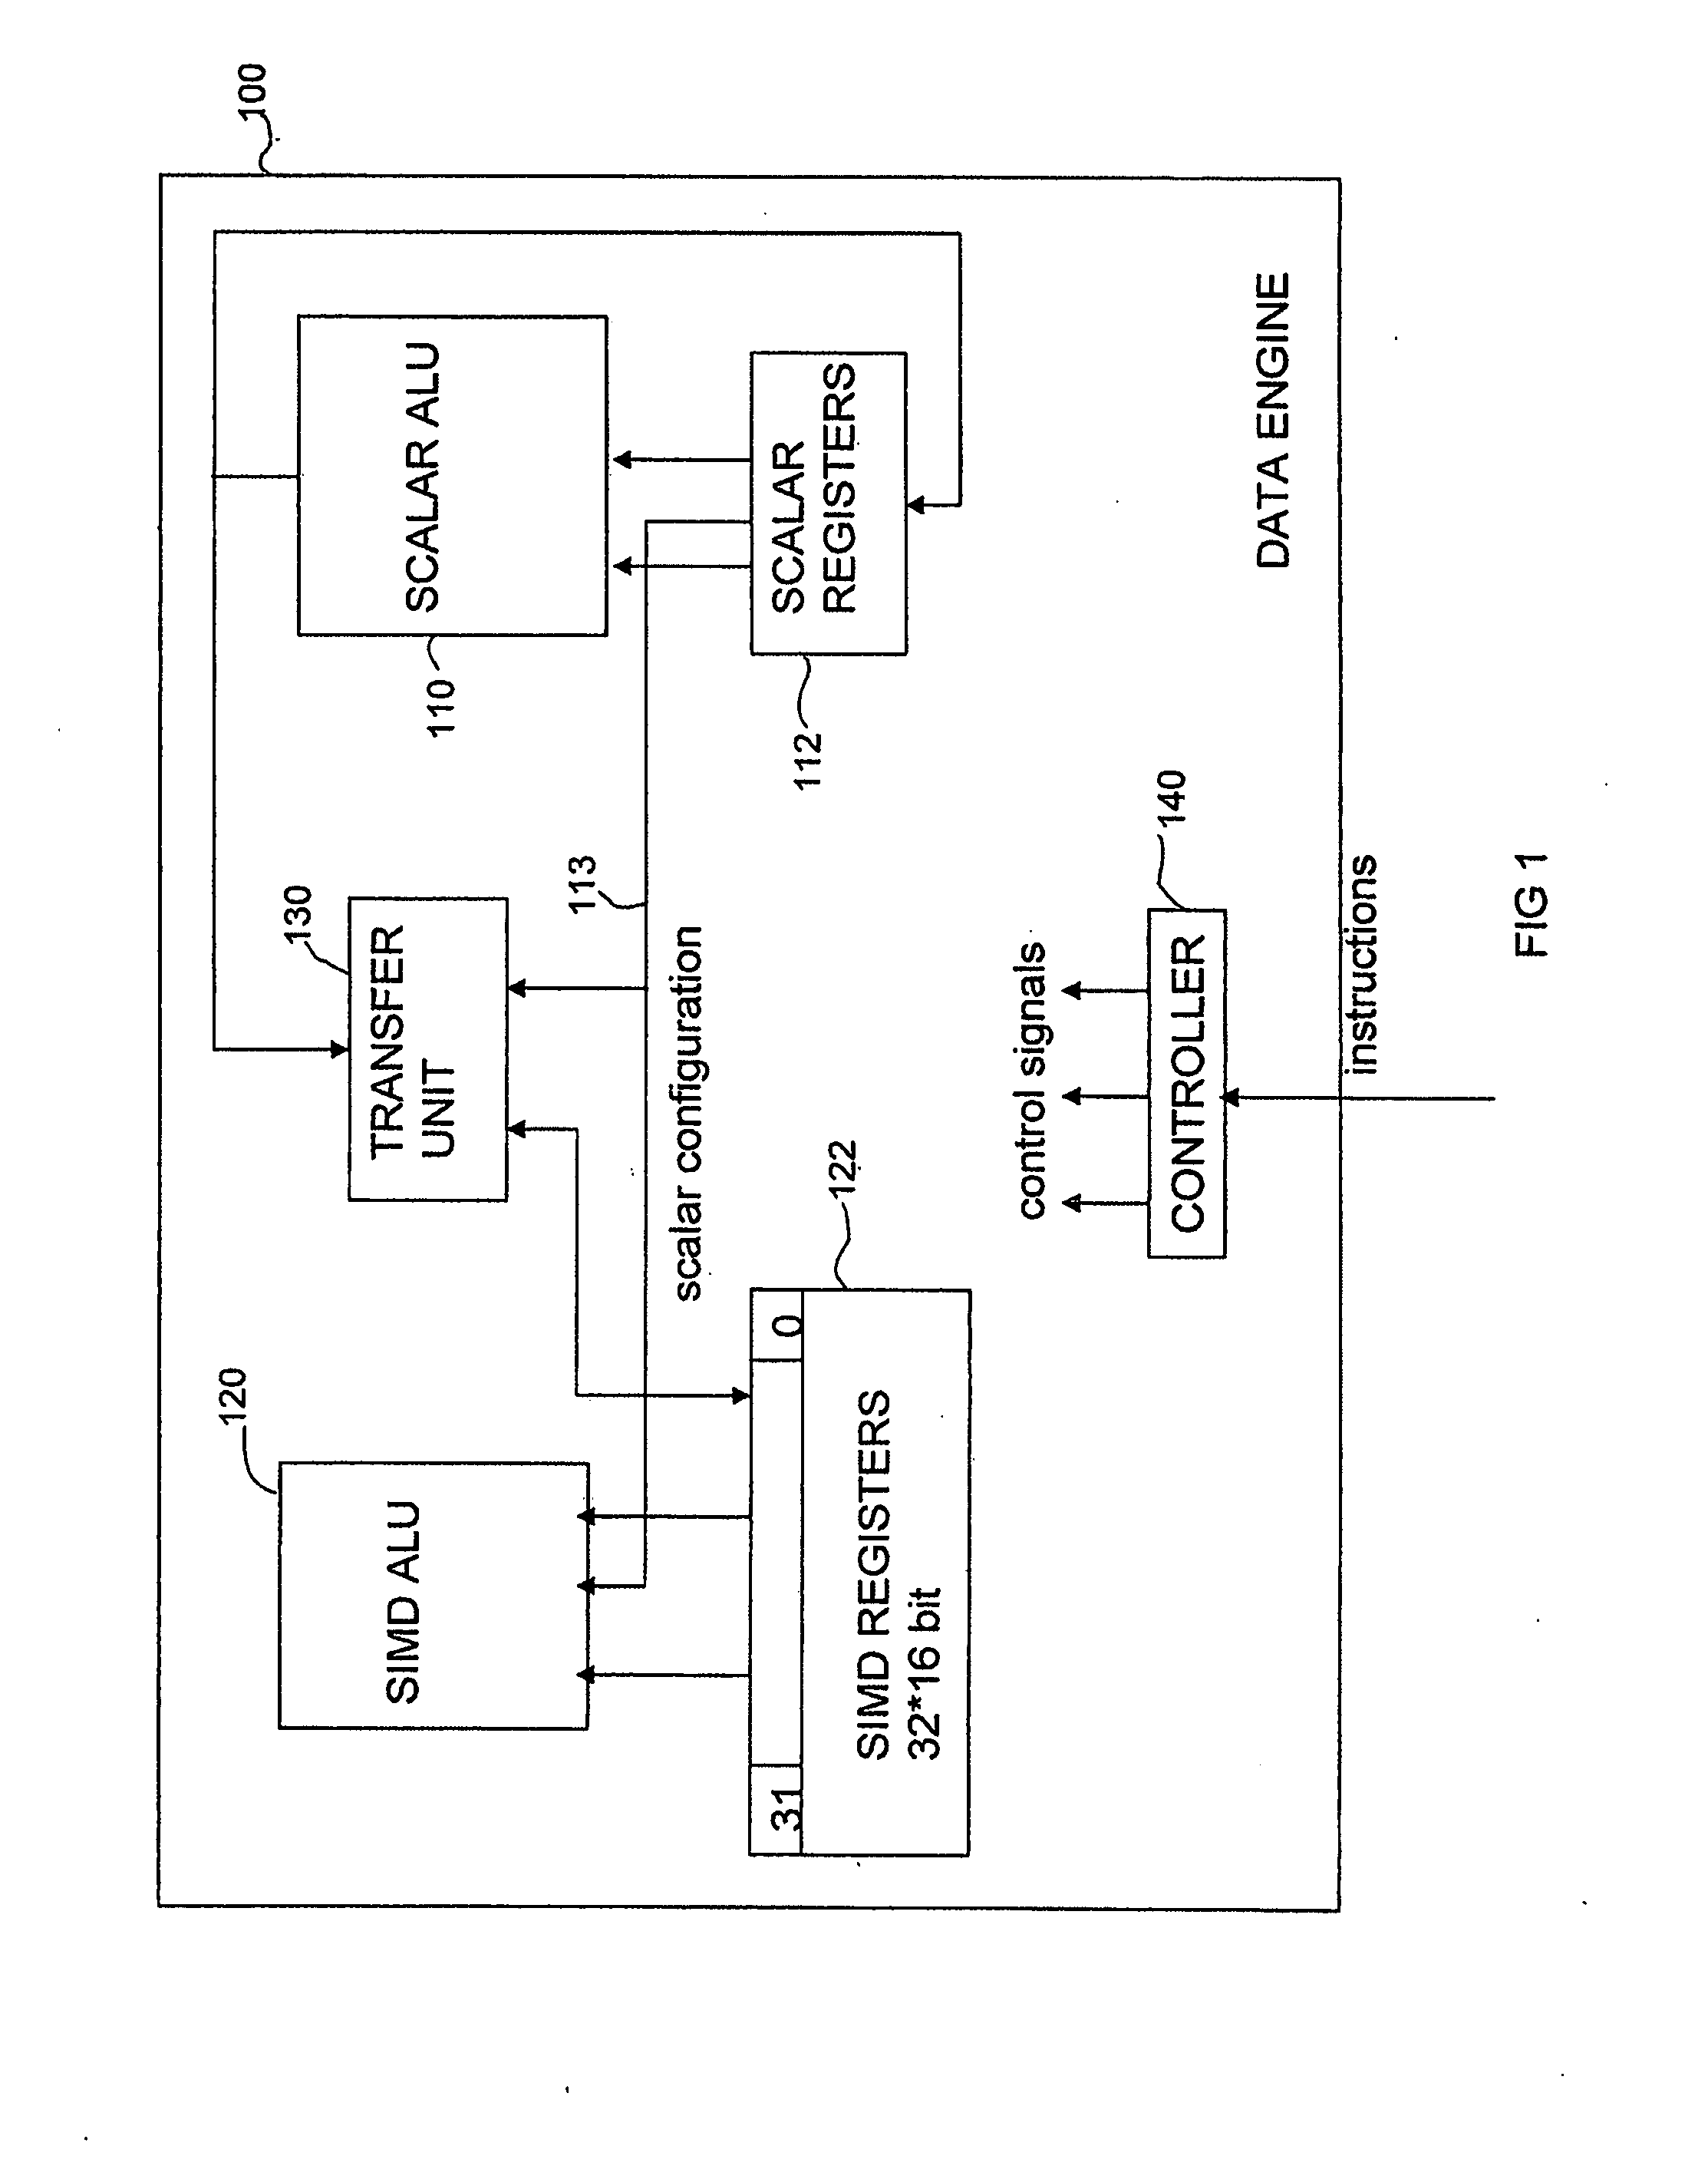 Apparatus and method for performing rearrangement and arithmetic operations on data